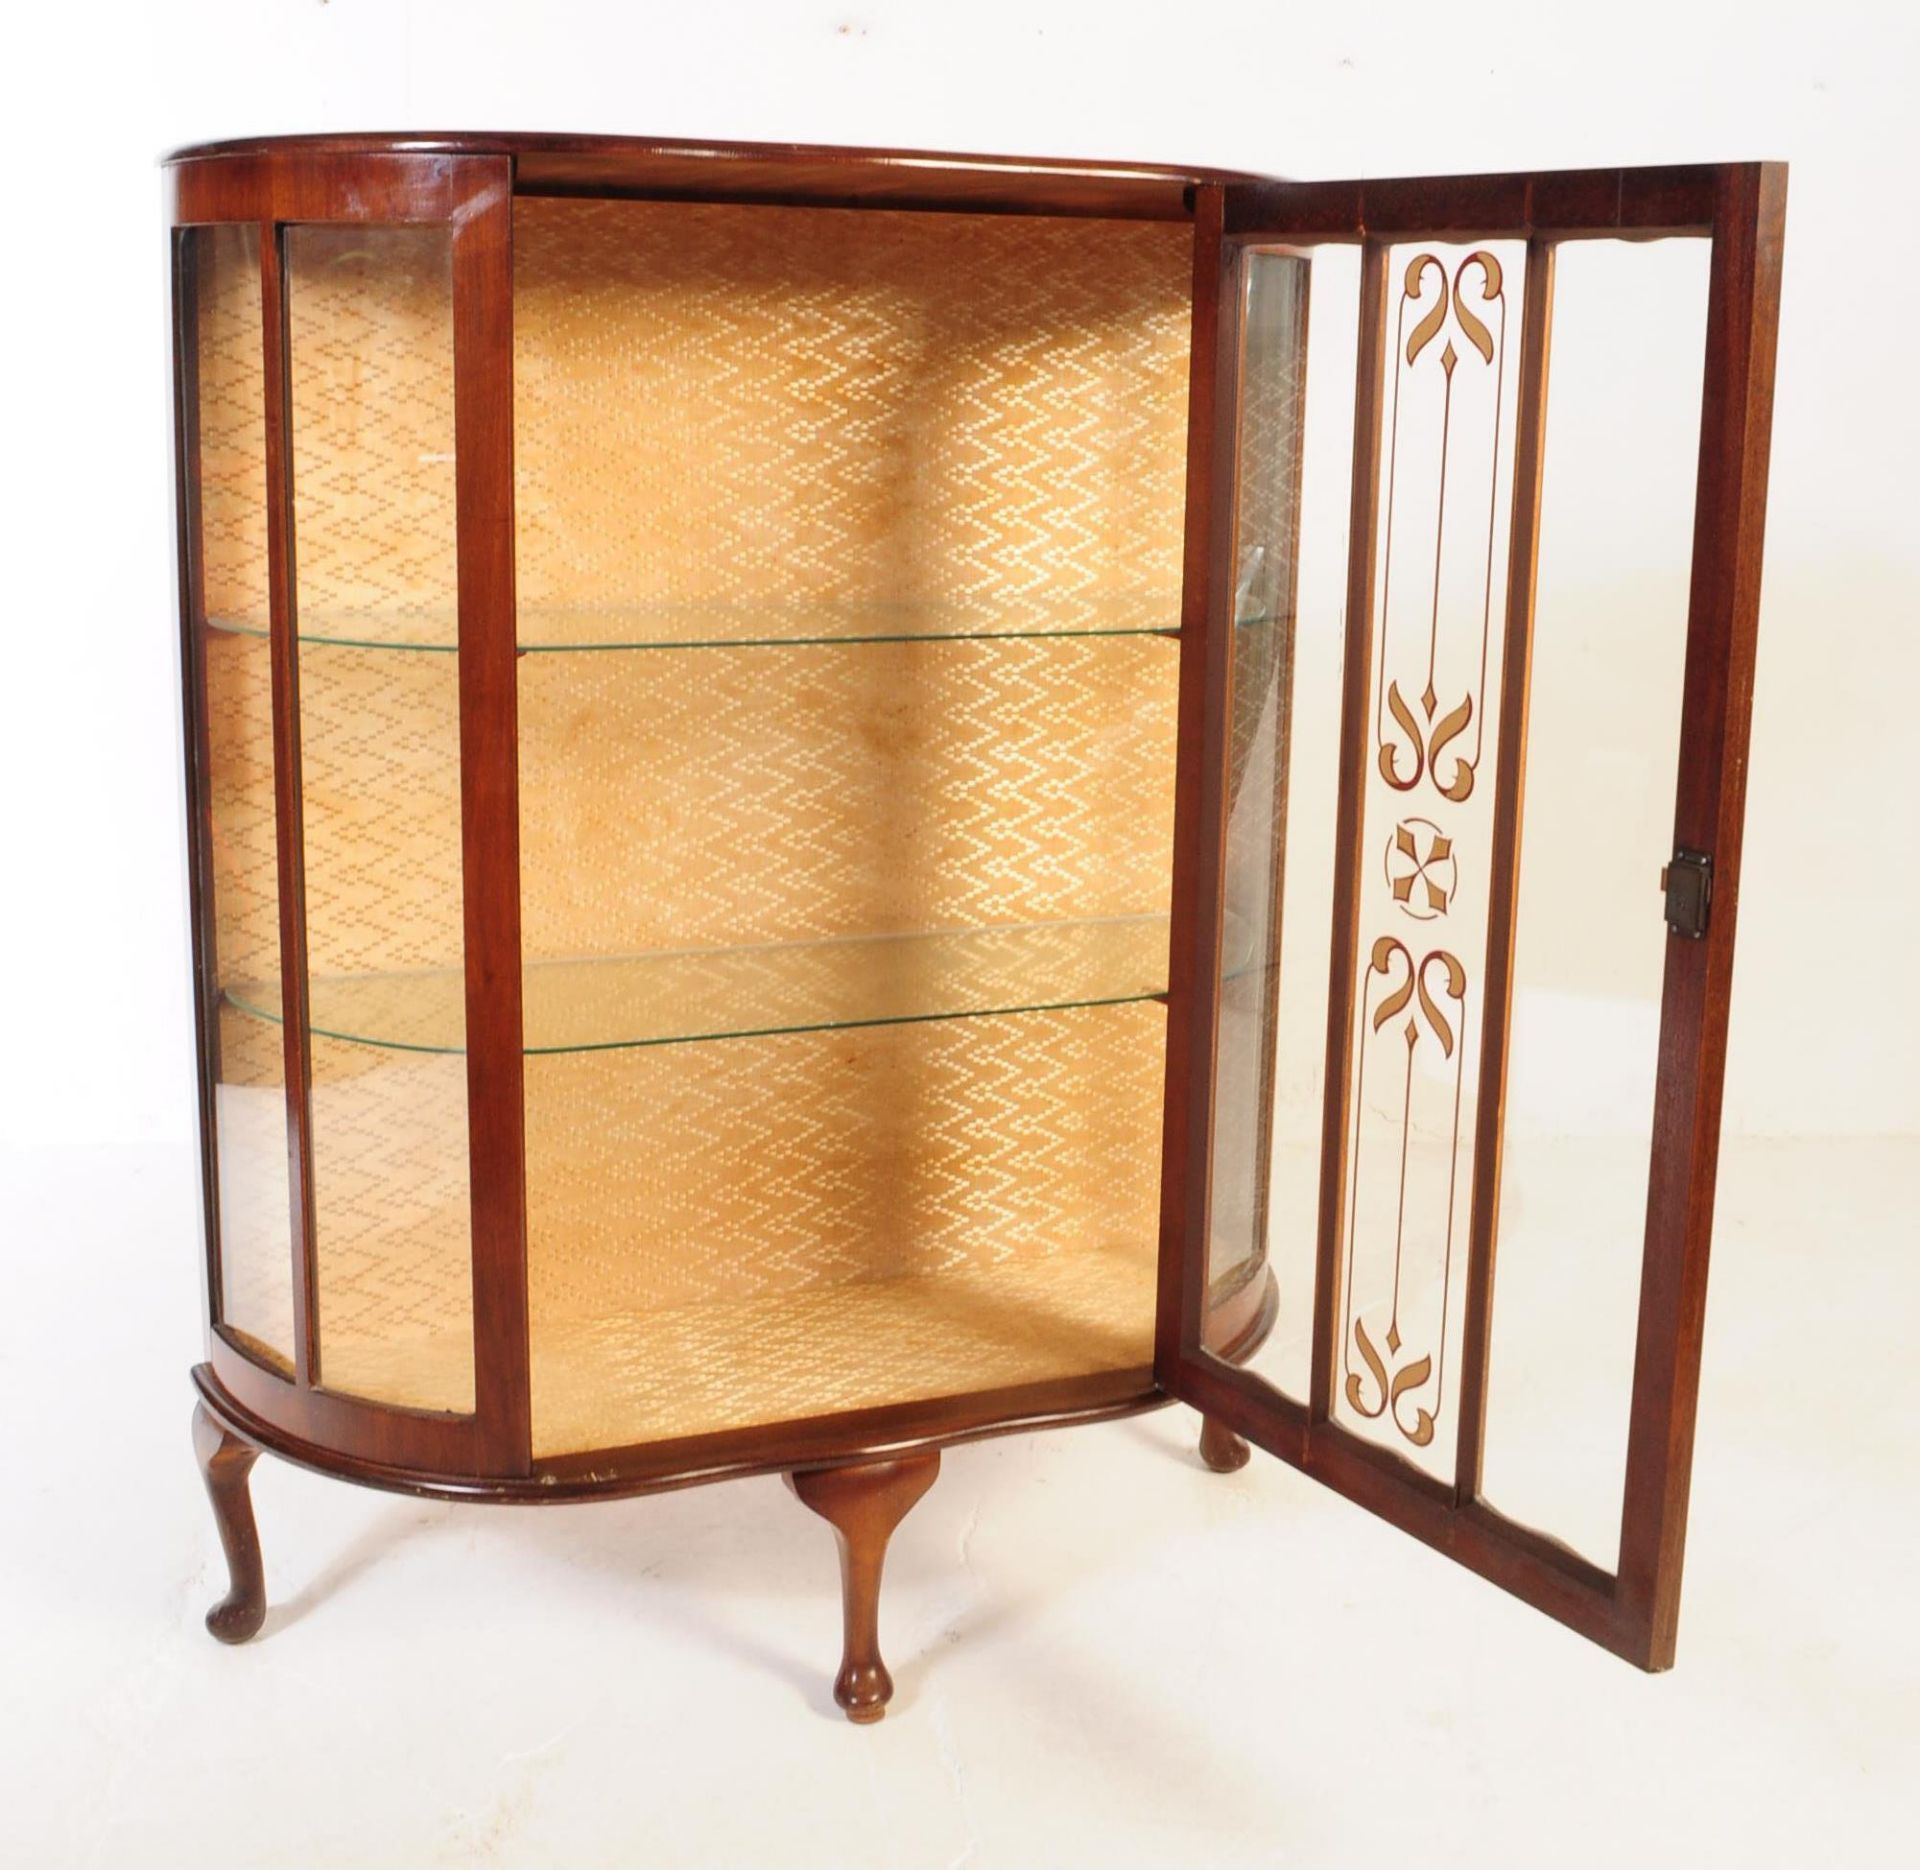 VINTAGE MID 20TH CENTURY WALNUT QUEEN ANNE DISPLAY CABINET - Image 2 of 4